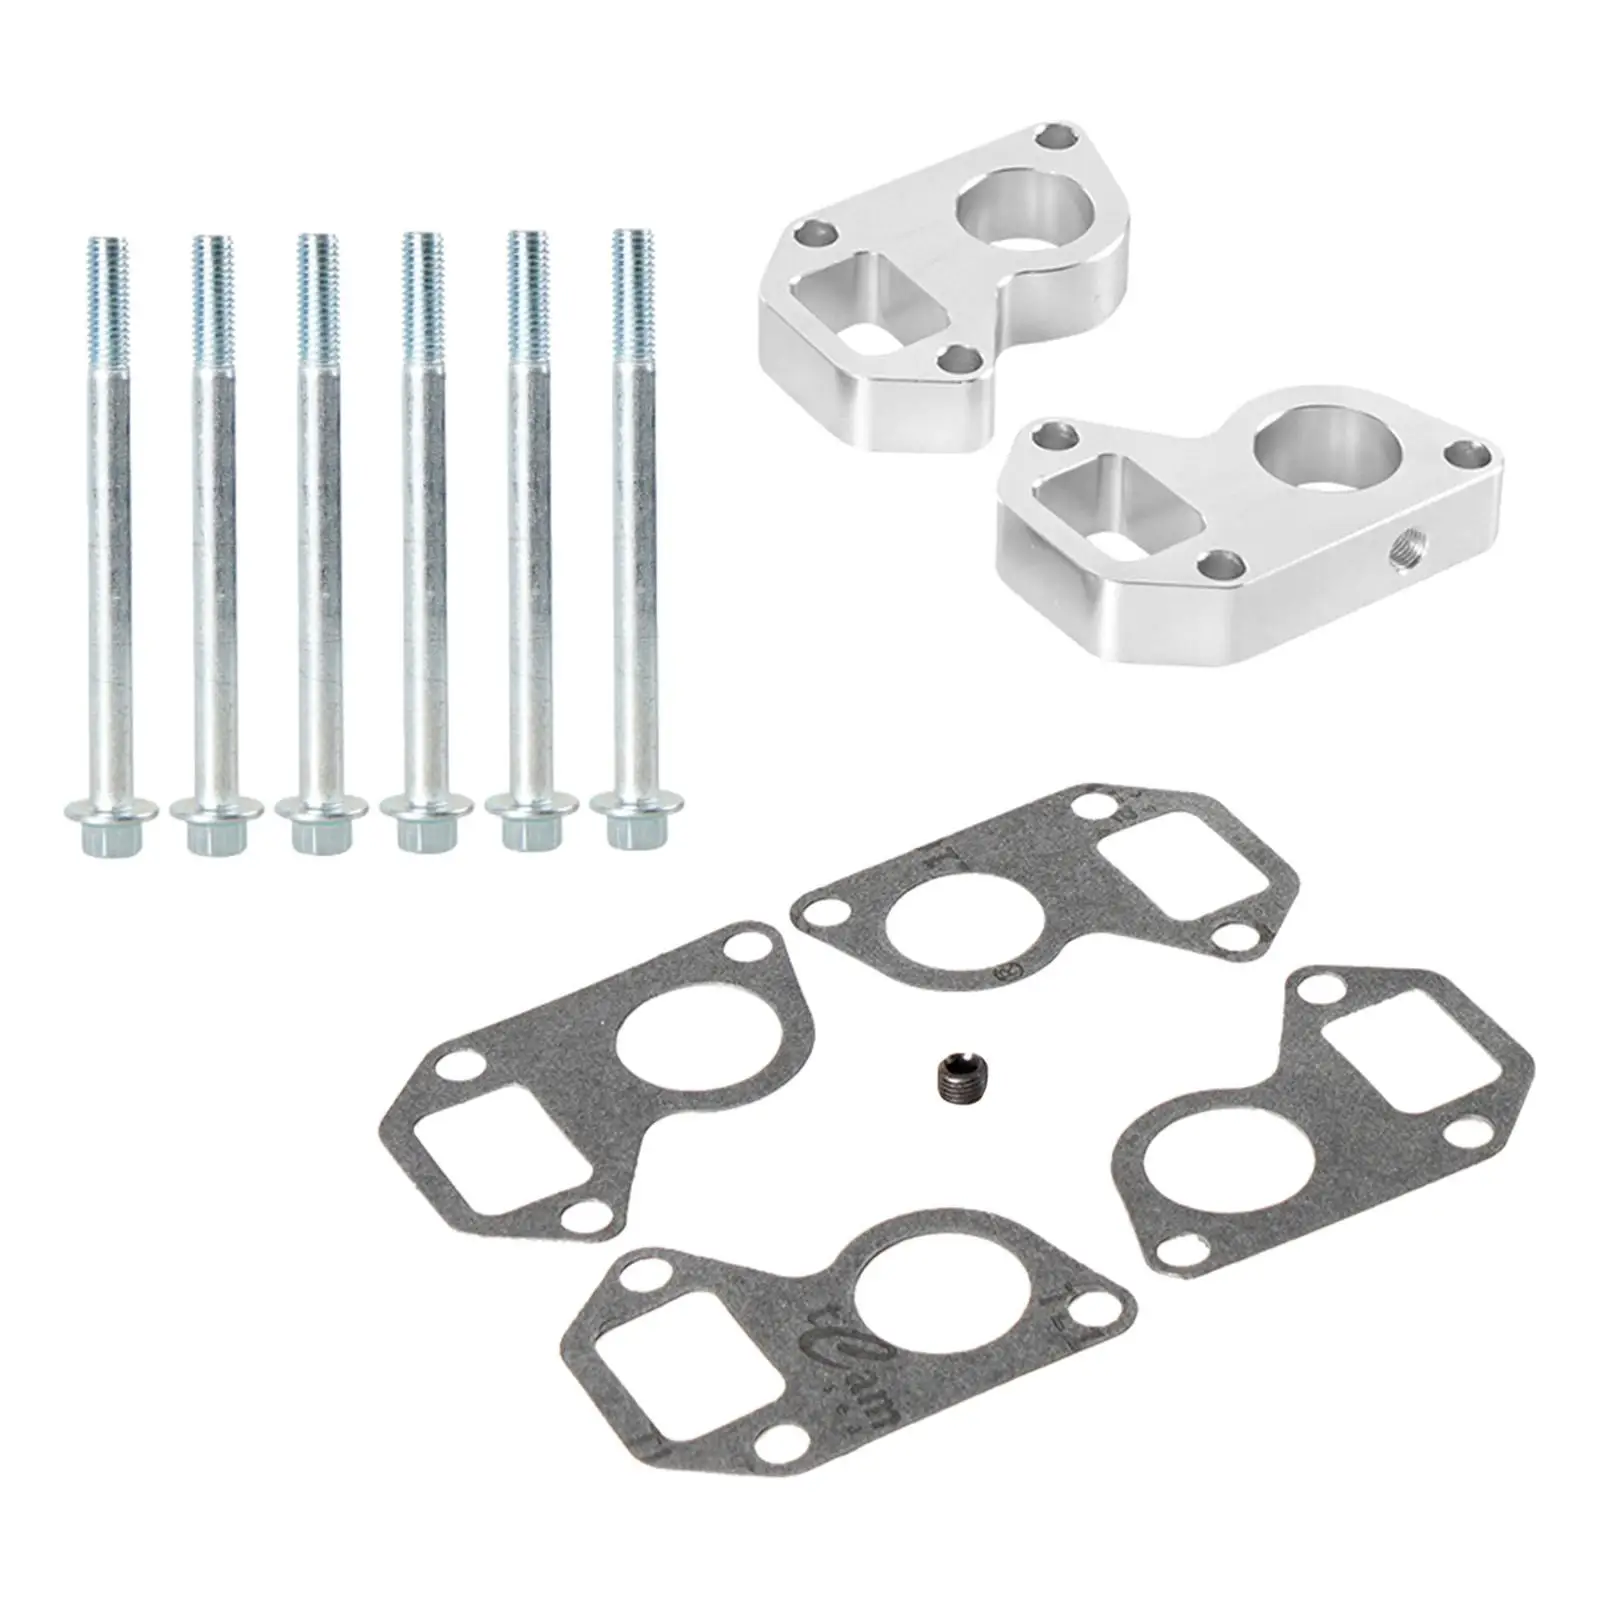 Water Pump Spacer Truck Adapter Swap Kit Fit for LS1 Spare Parts Durable